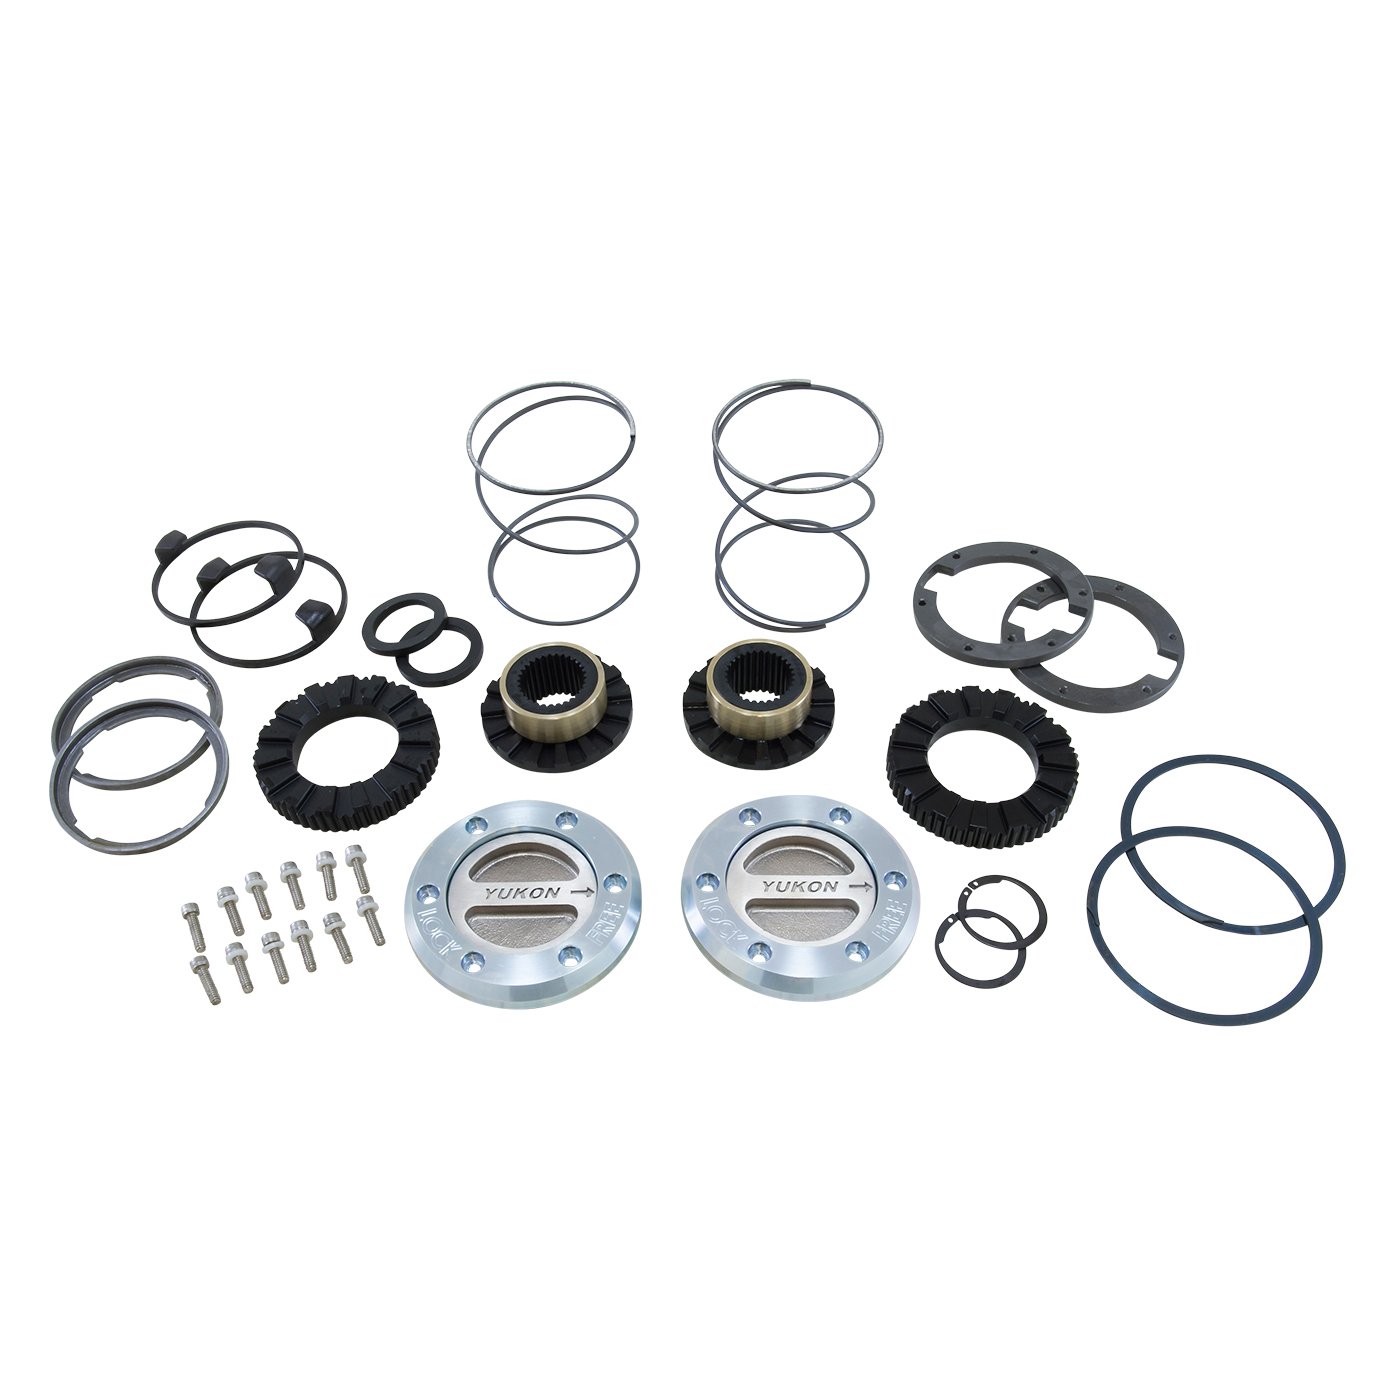 Hardcore Locking Axle Hub Set Fits 1979-91 GM, 1978-97 F350 and 1979-93 Dodge One-Ton Fronts with Dana Spicer 60